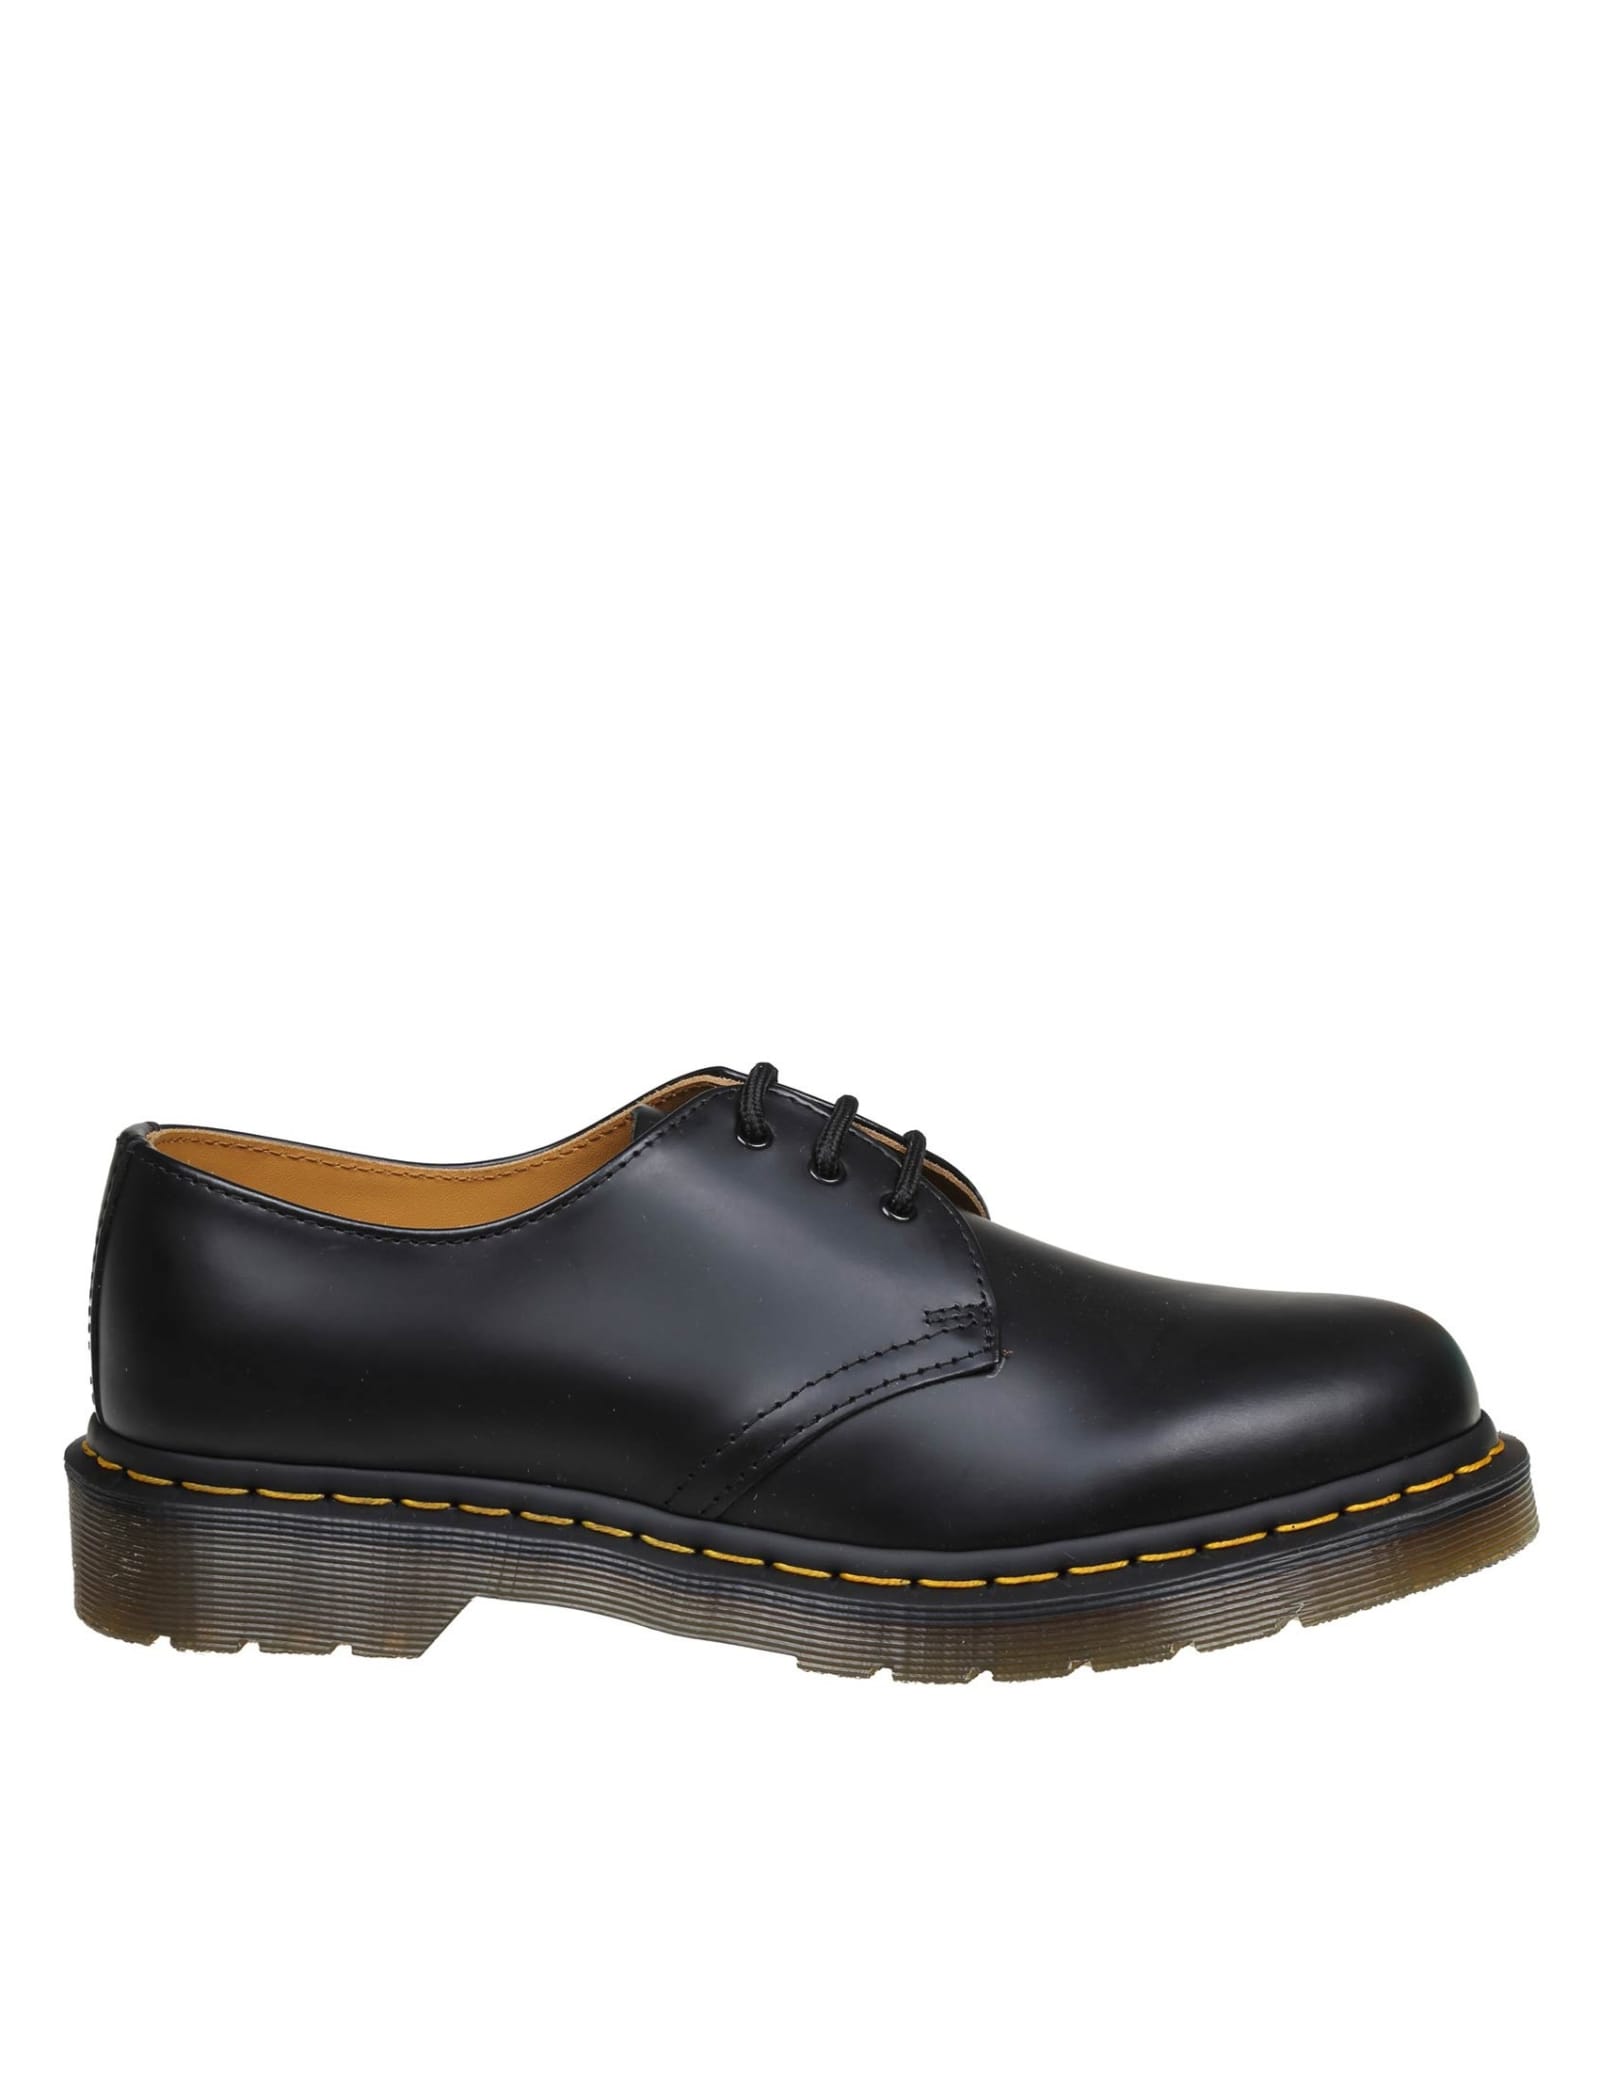 Dr. Martens' 1461 Lace-up Shoe In Black Leather